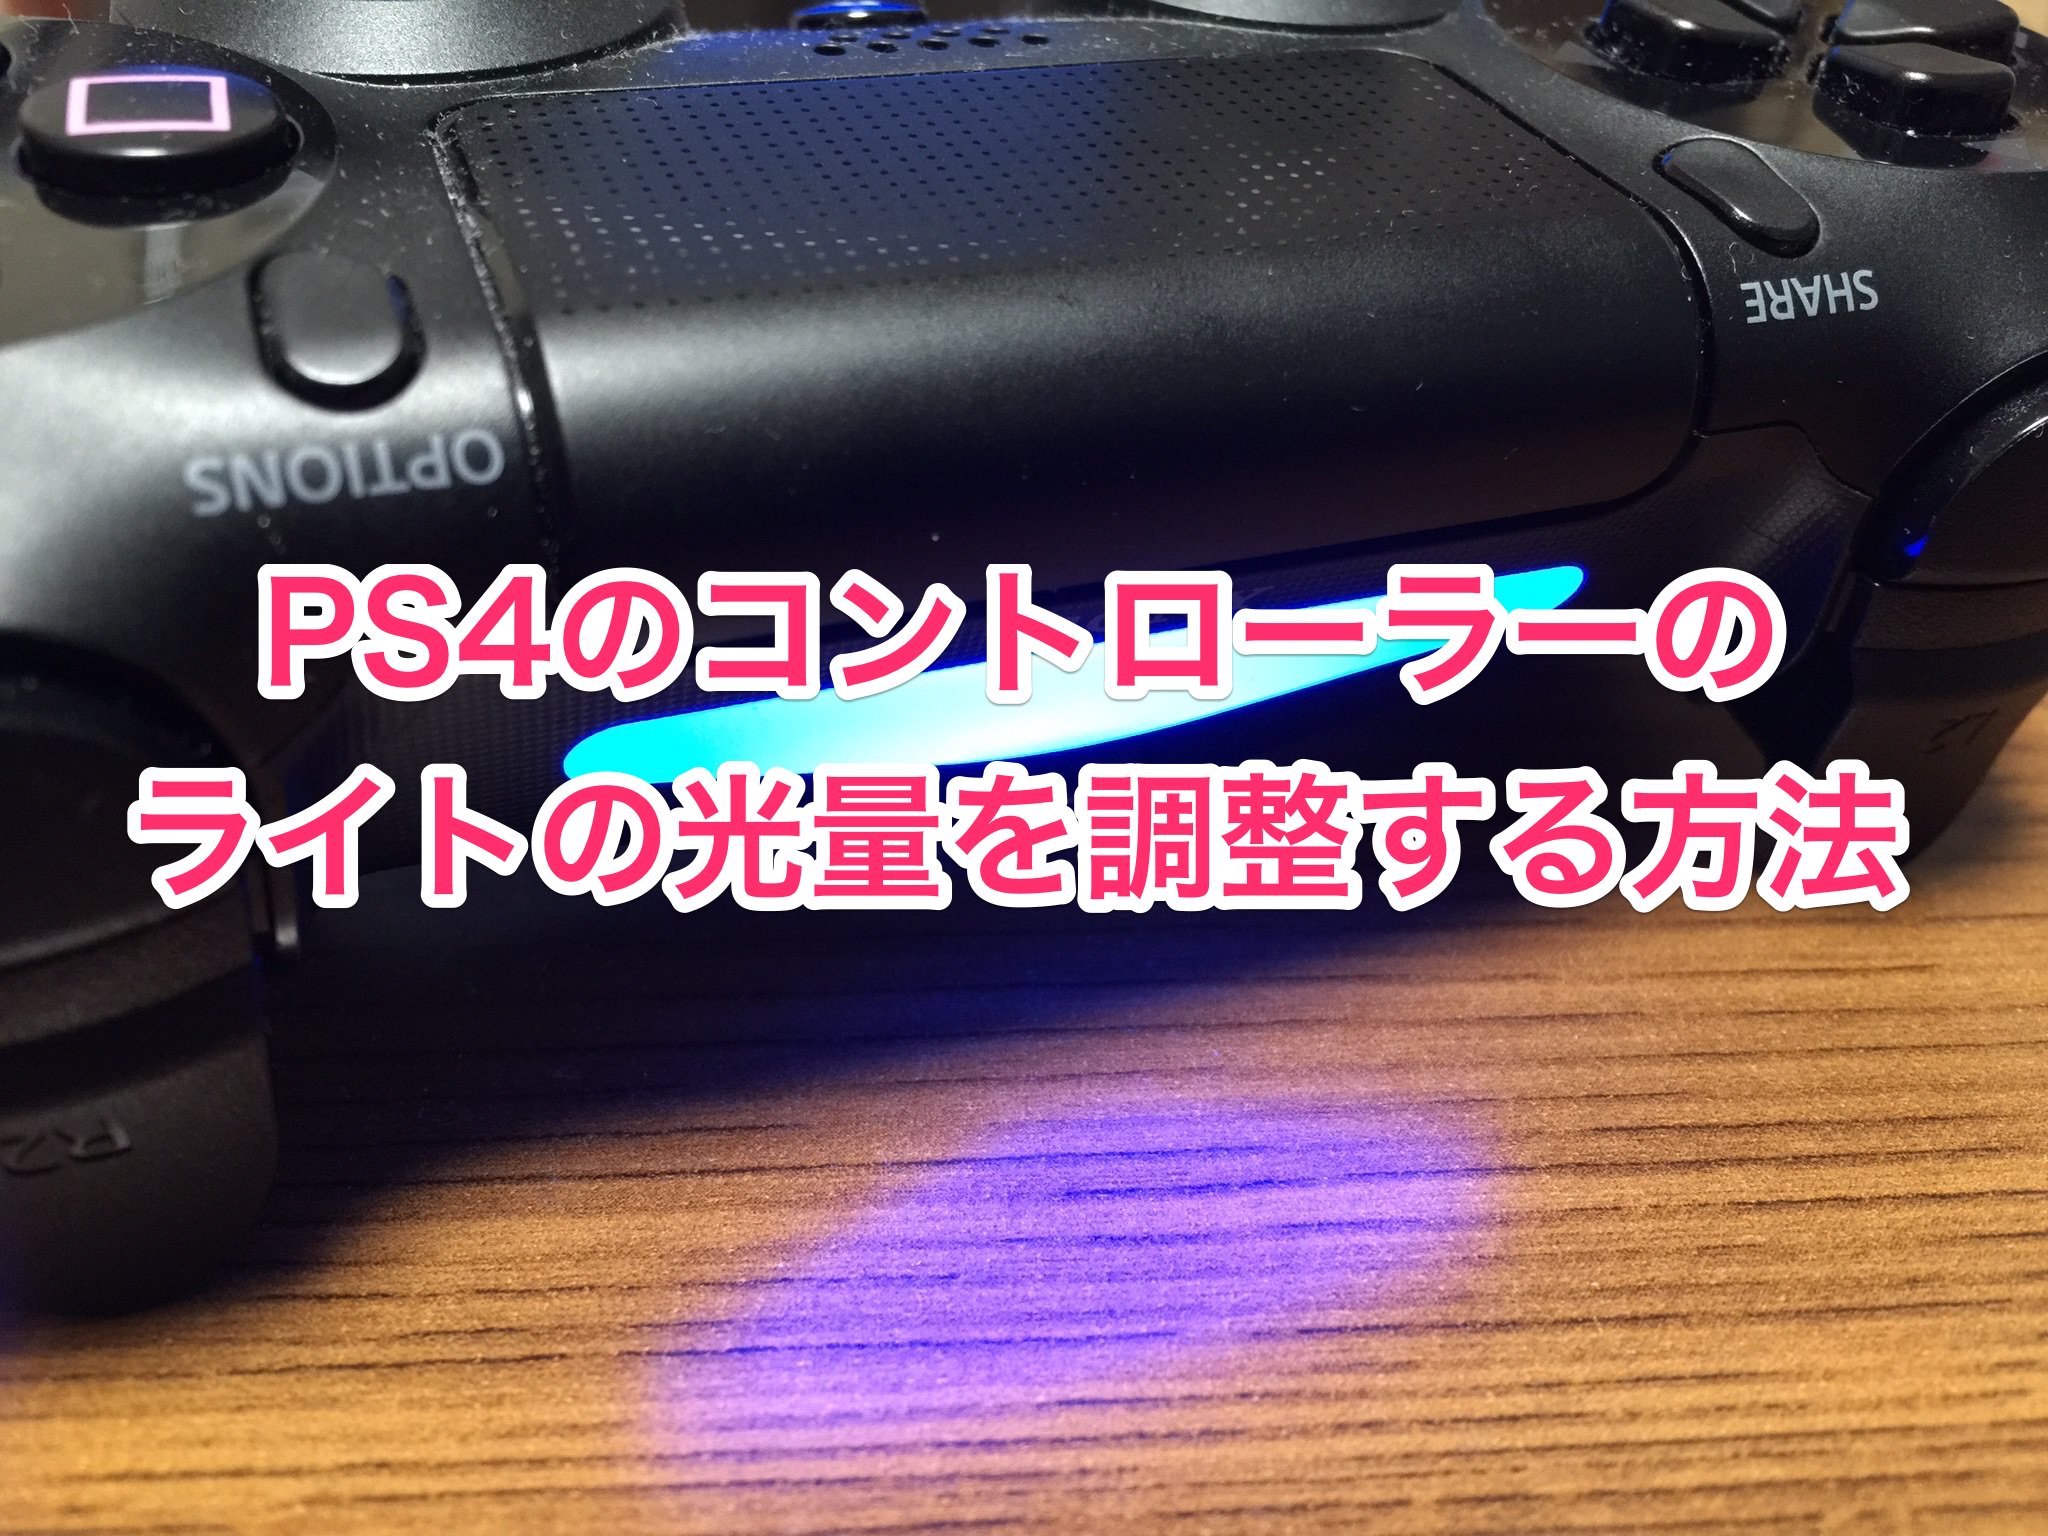 How to adjust to luminous energy of controller for playstation 4 01